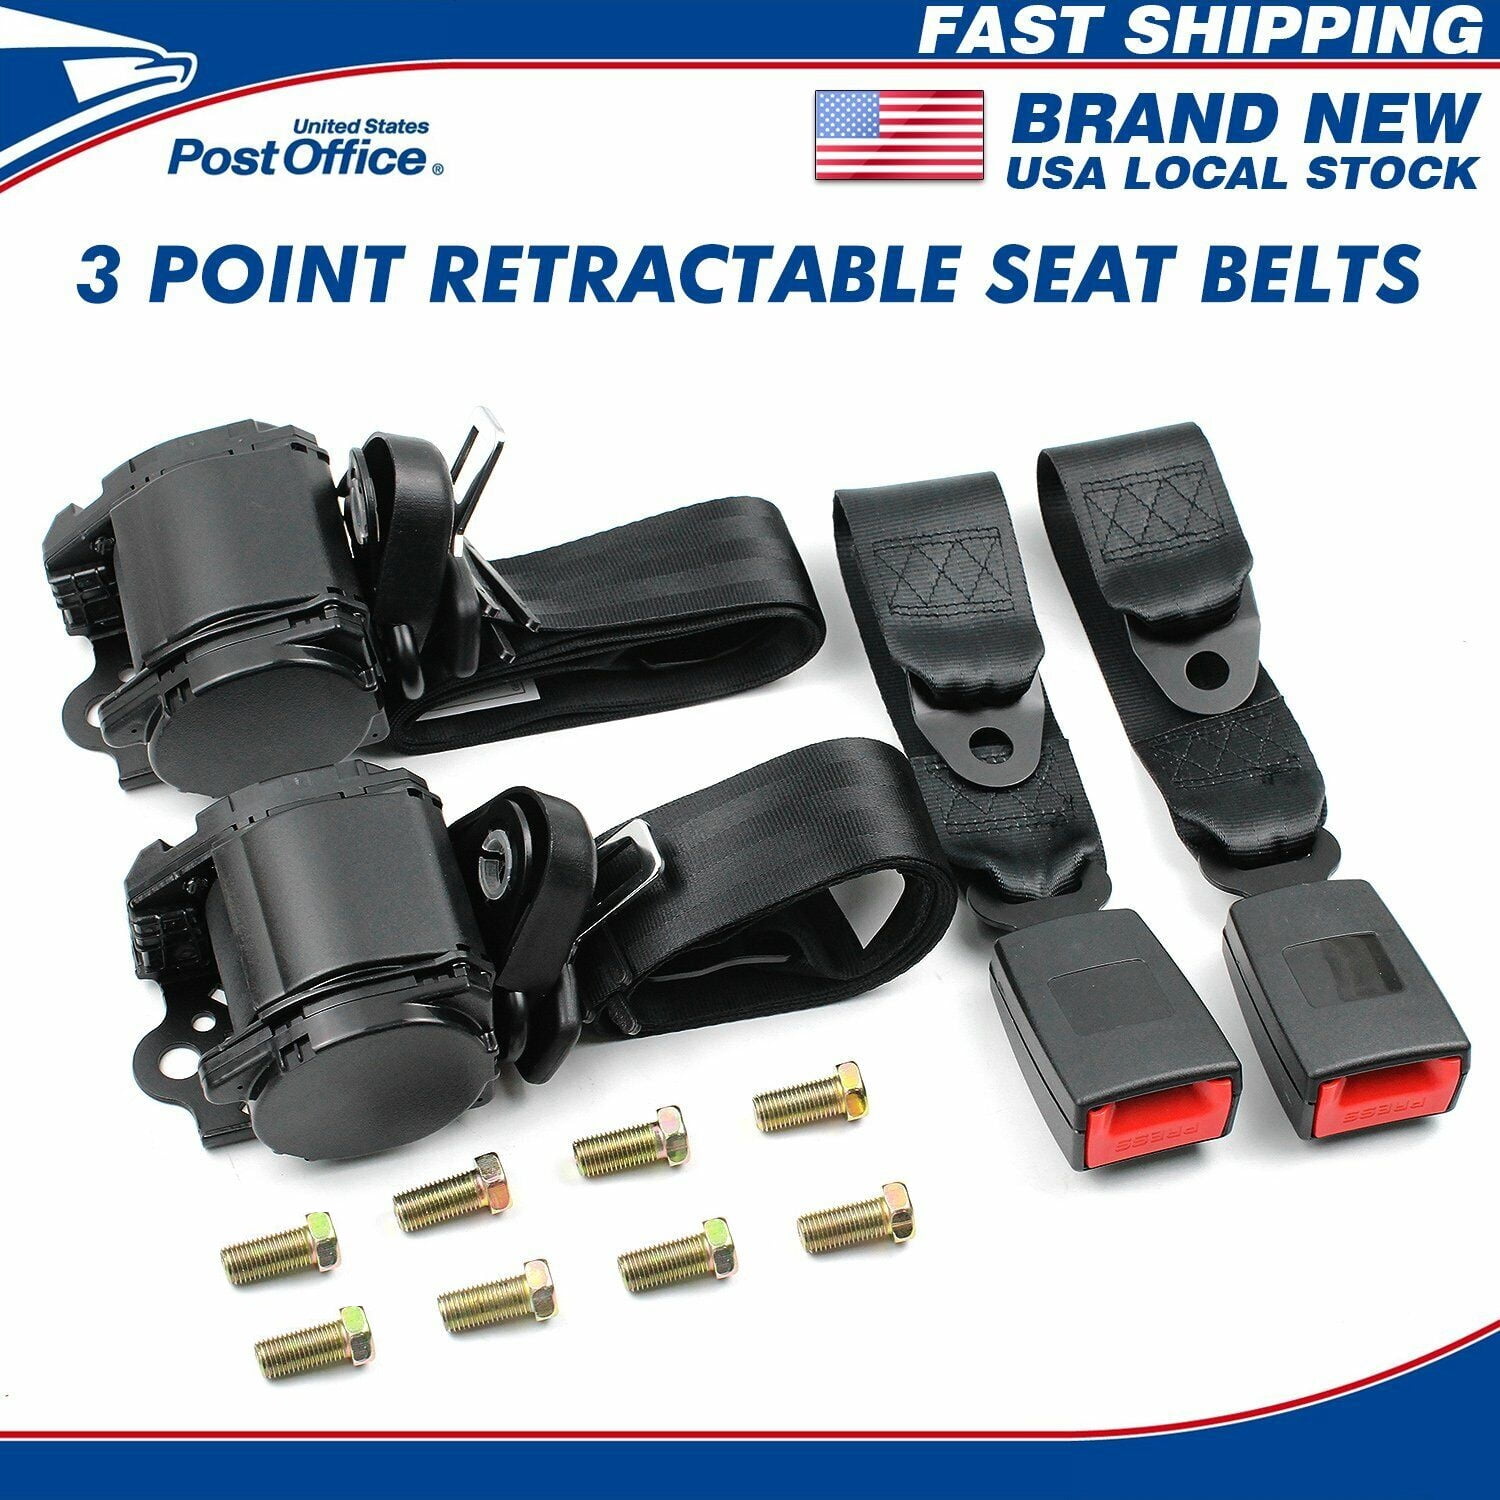 Original Classic Seat Belt Lock | Original Seat Belt Guard Made with Strong  ABS | for Special Needs Passengers | Easy Installation | Preventing